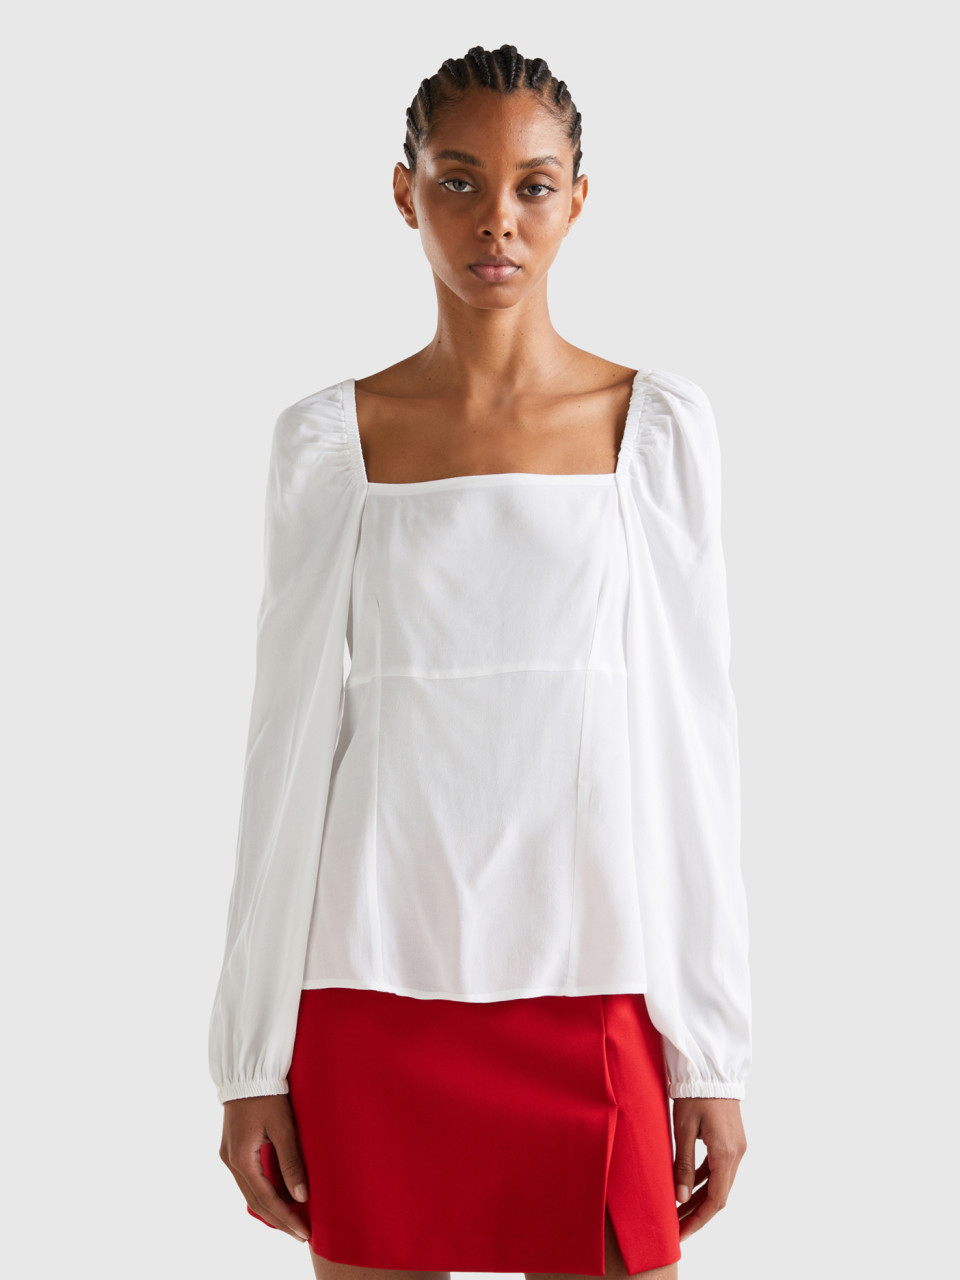 Benetton, Slim Fit Blouse With Square Neck, White, Women